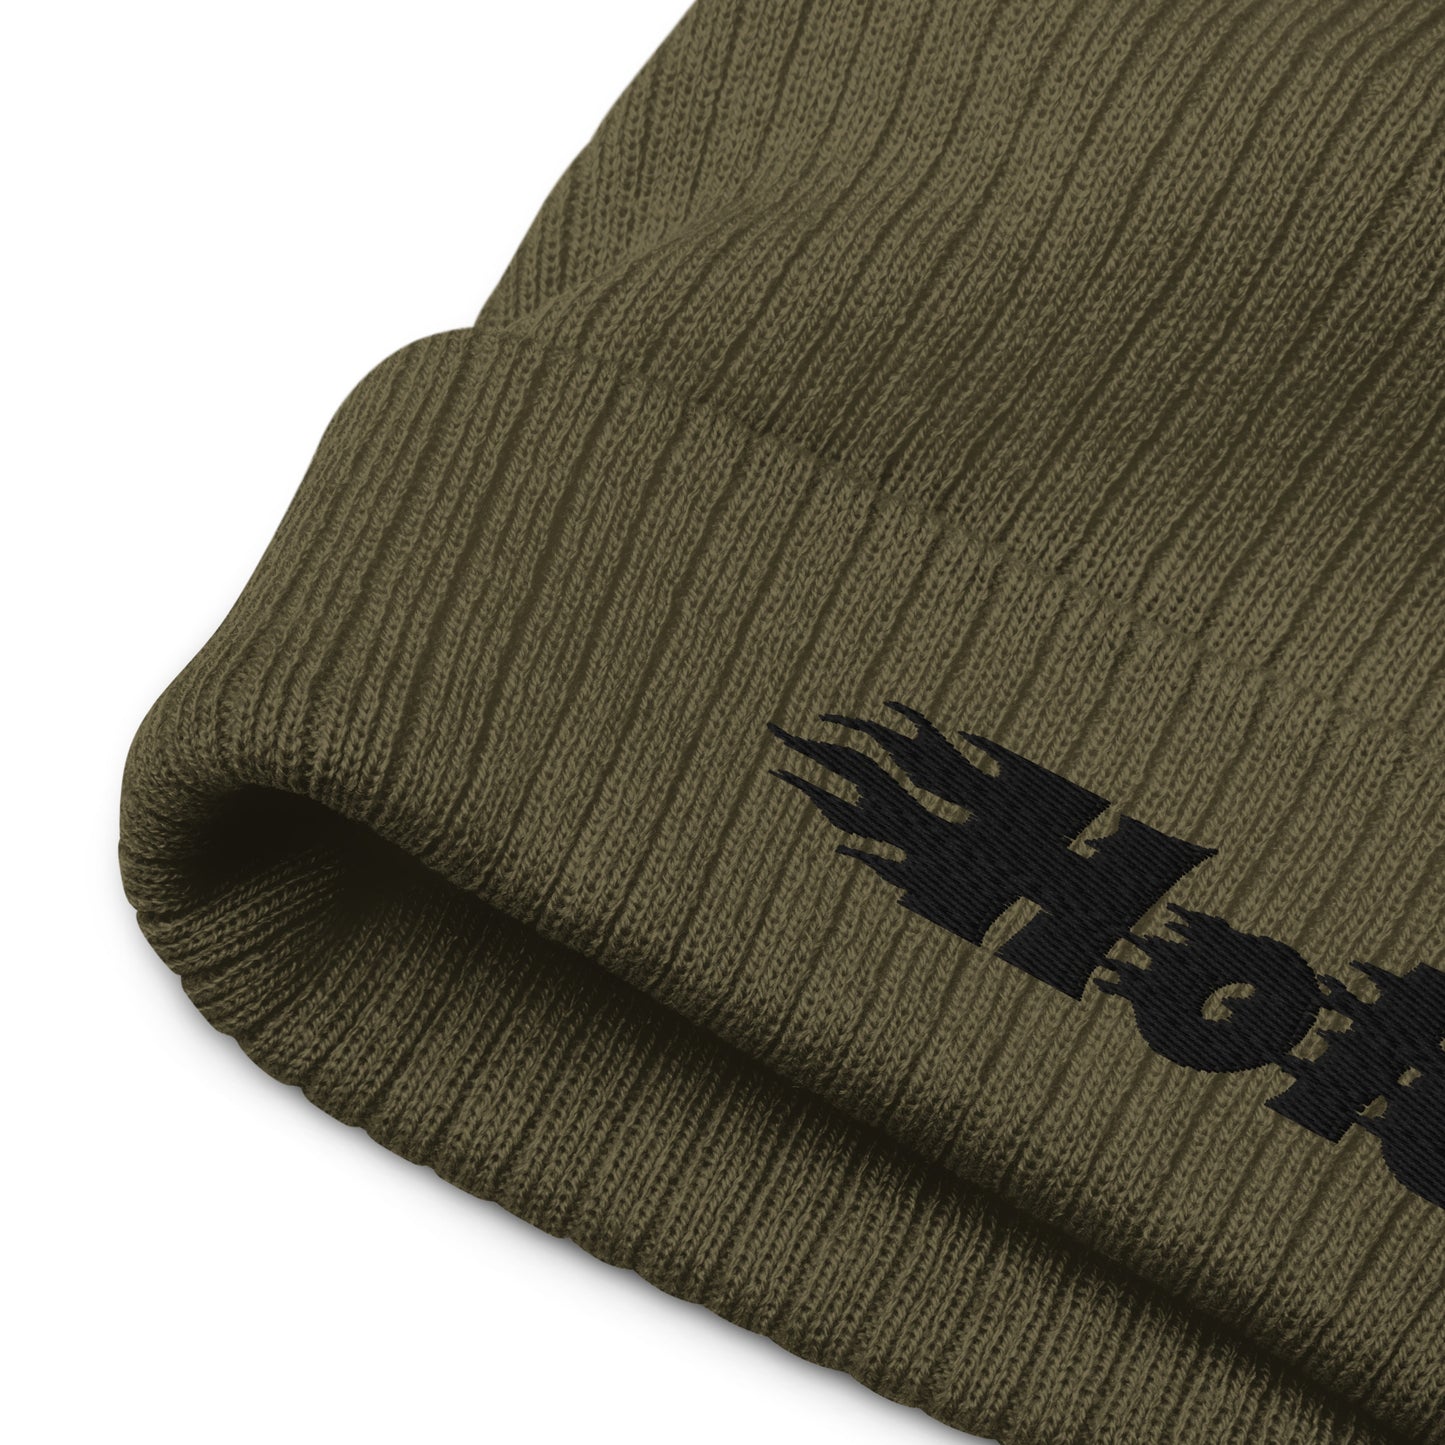 Ribbed h*le knit beanie